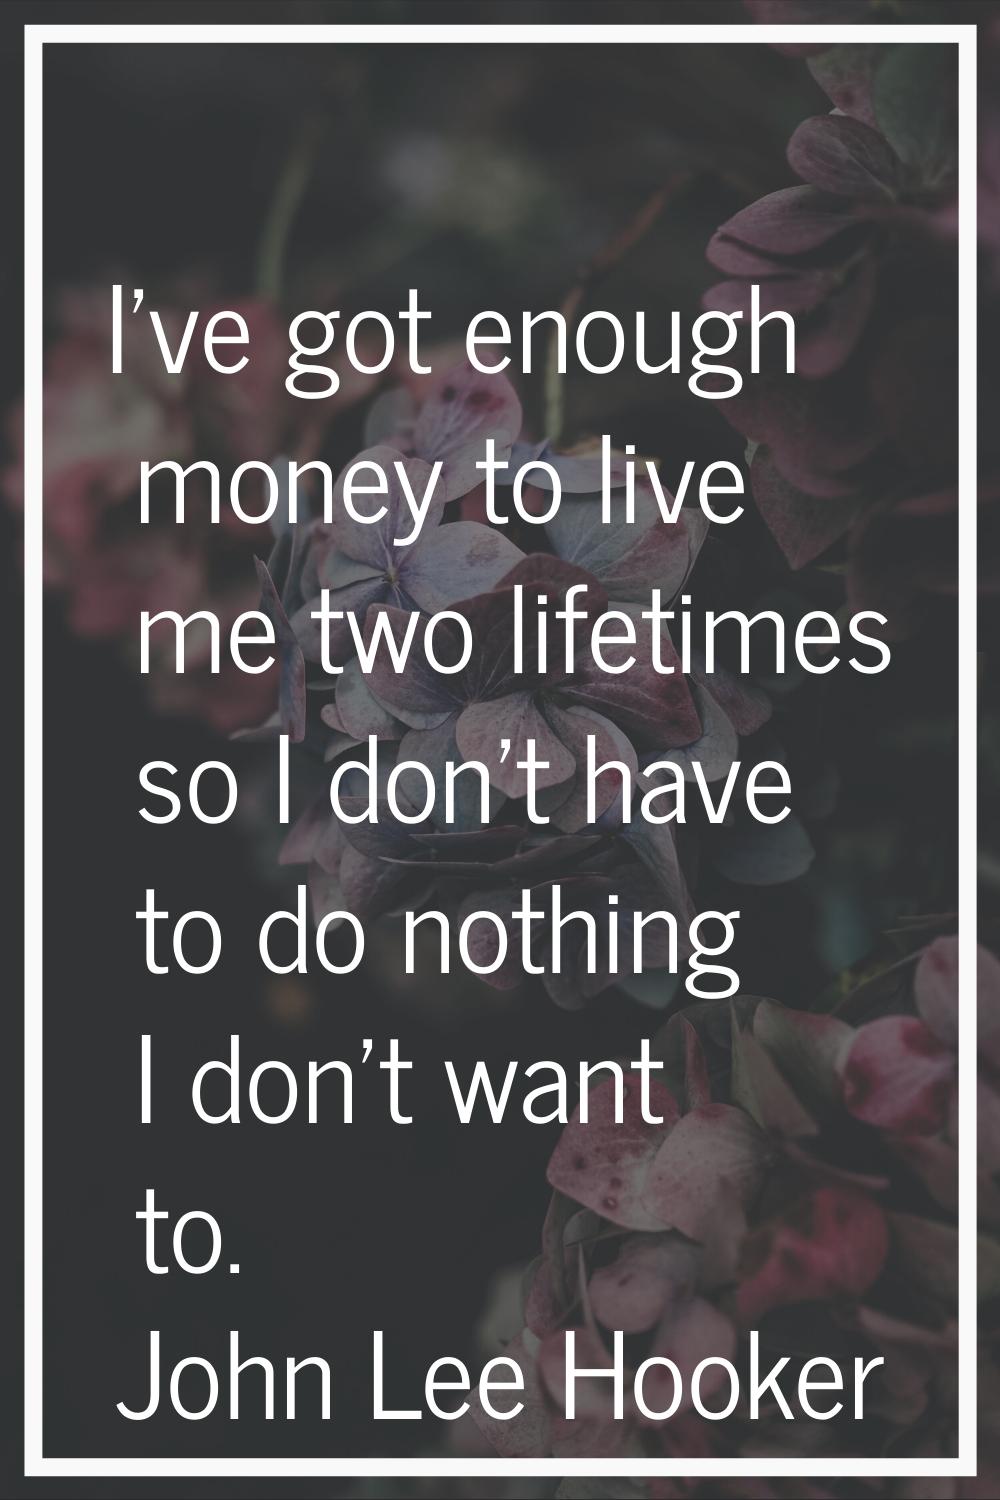 I've got enough money to live me two lifetimes so I don't have to do nothing I don't want to.